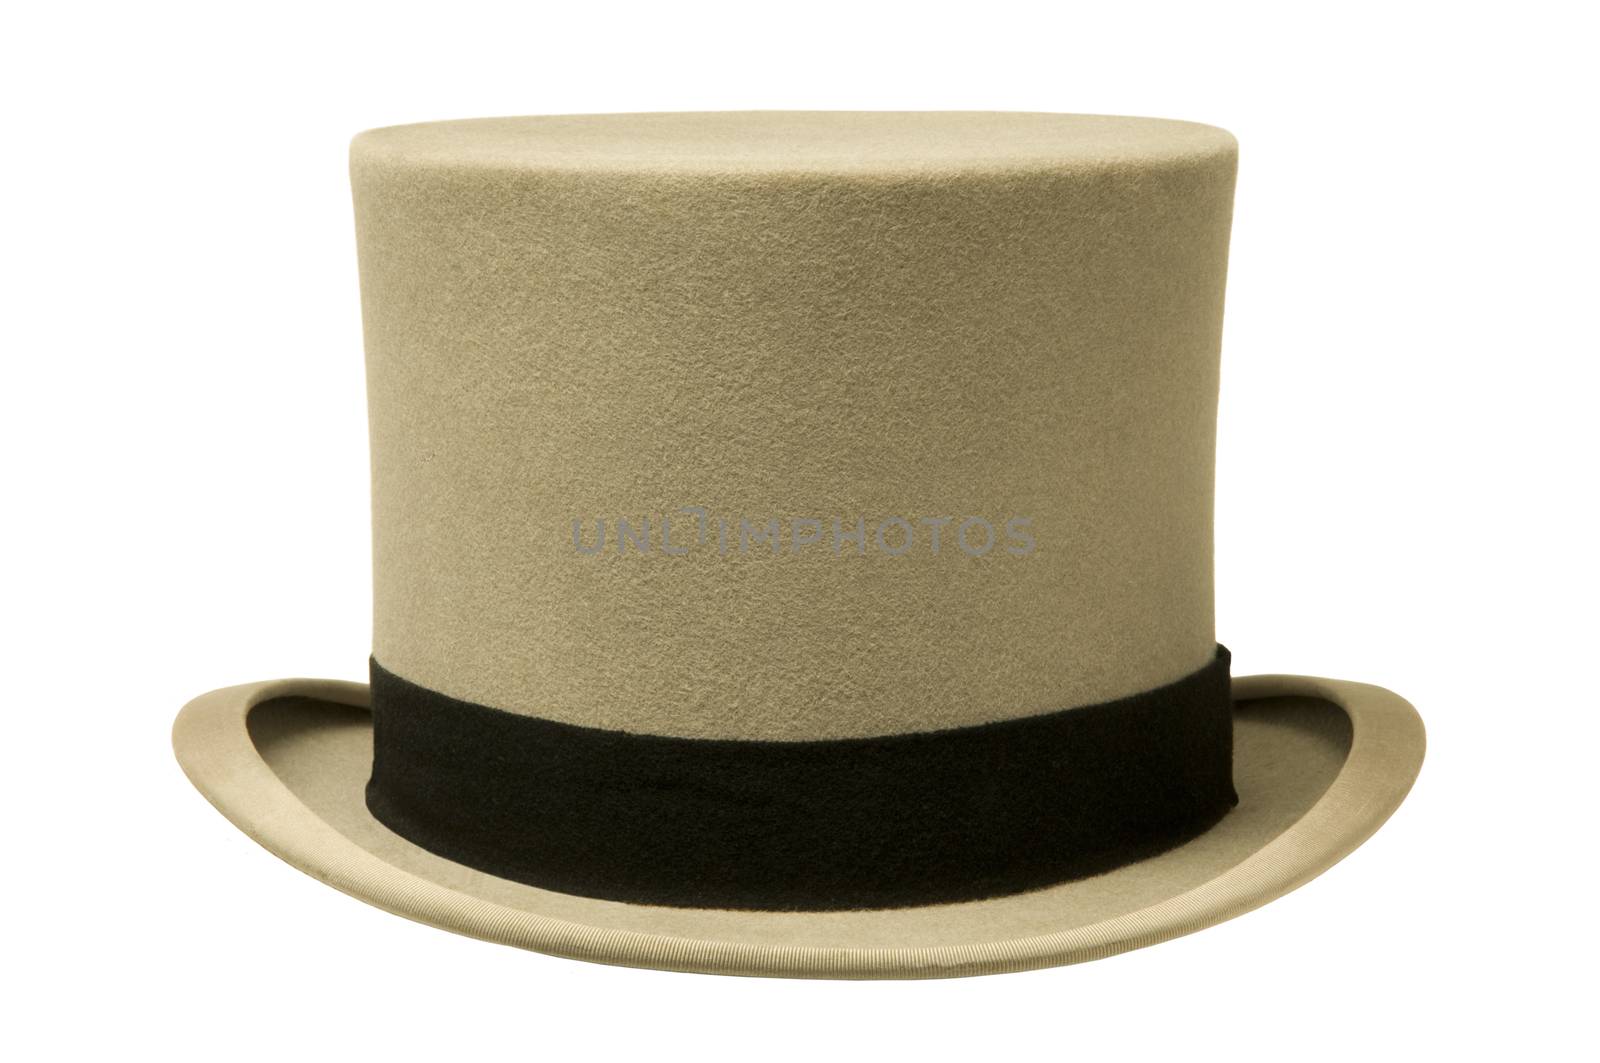 Vintage gray top hat against white background